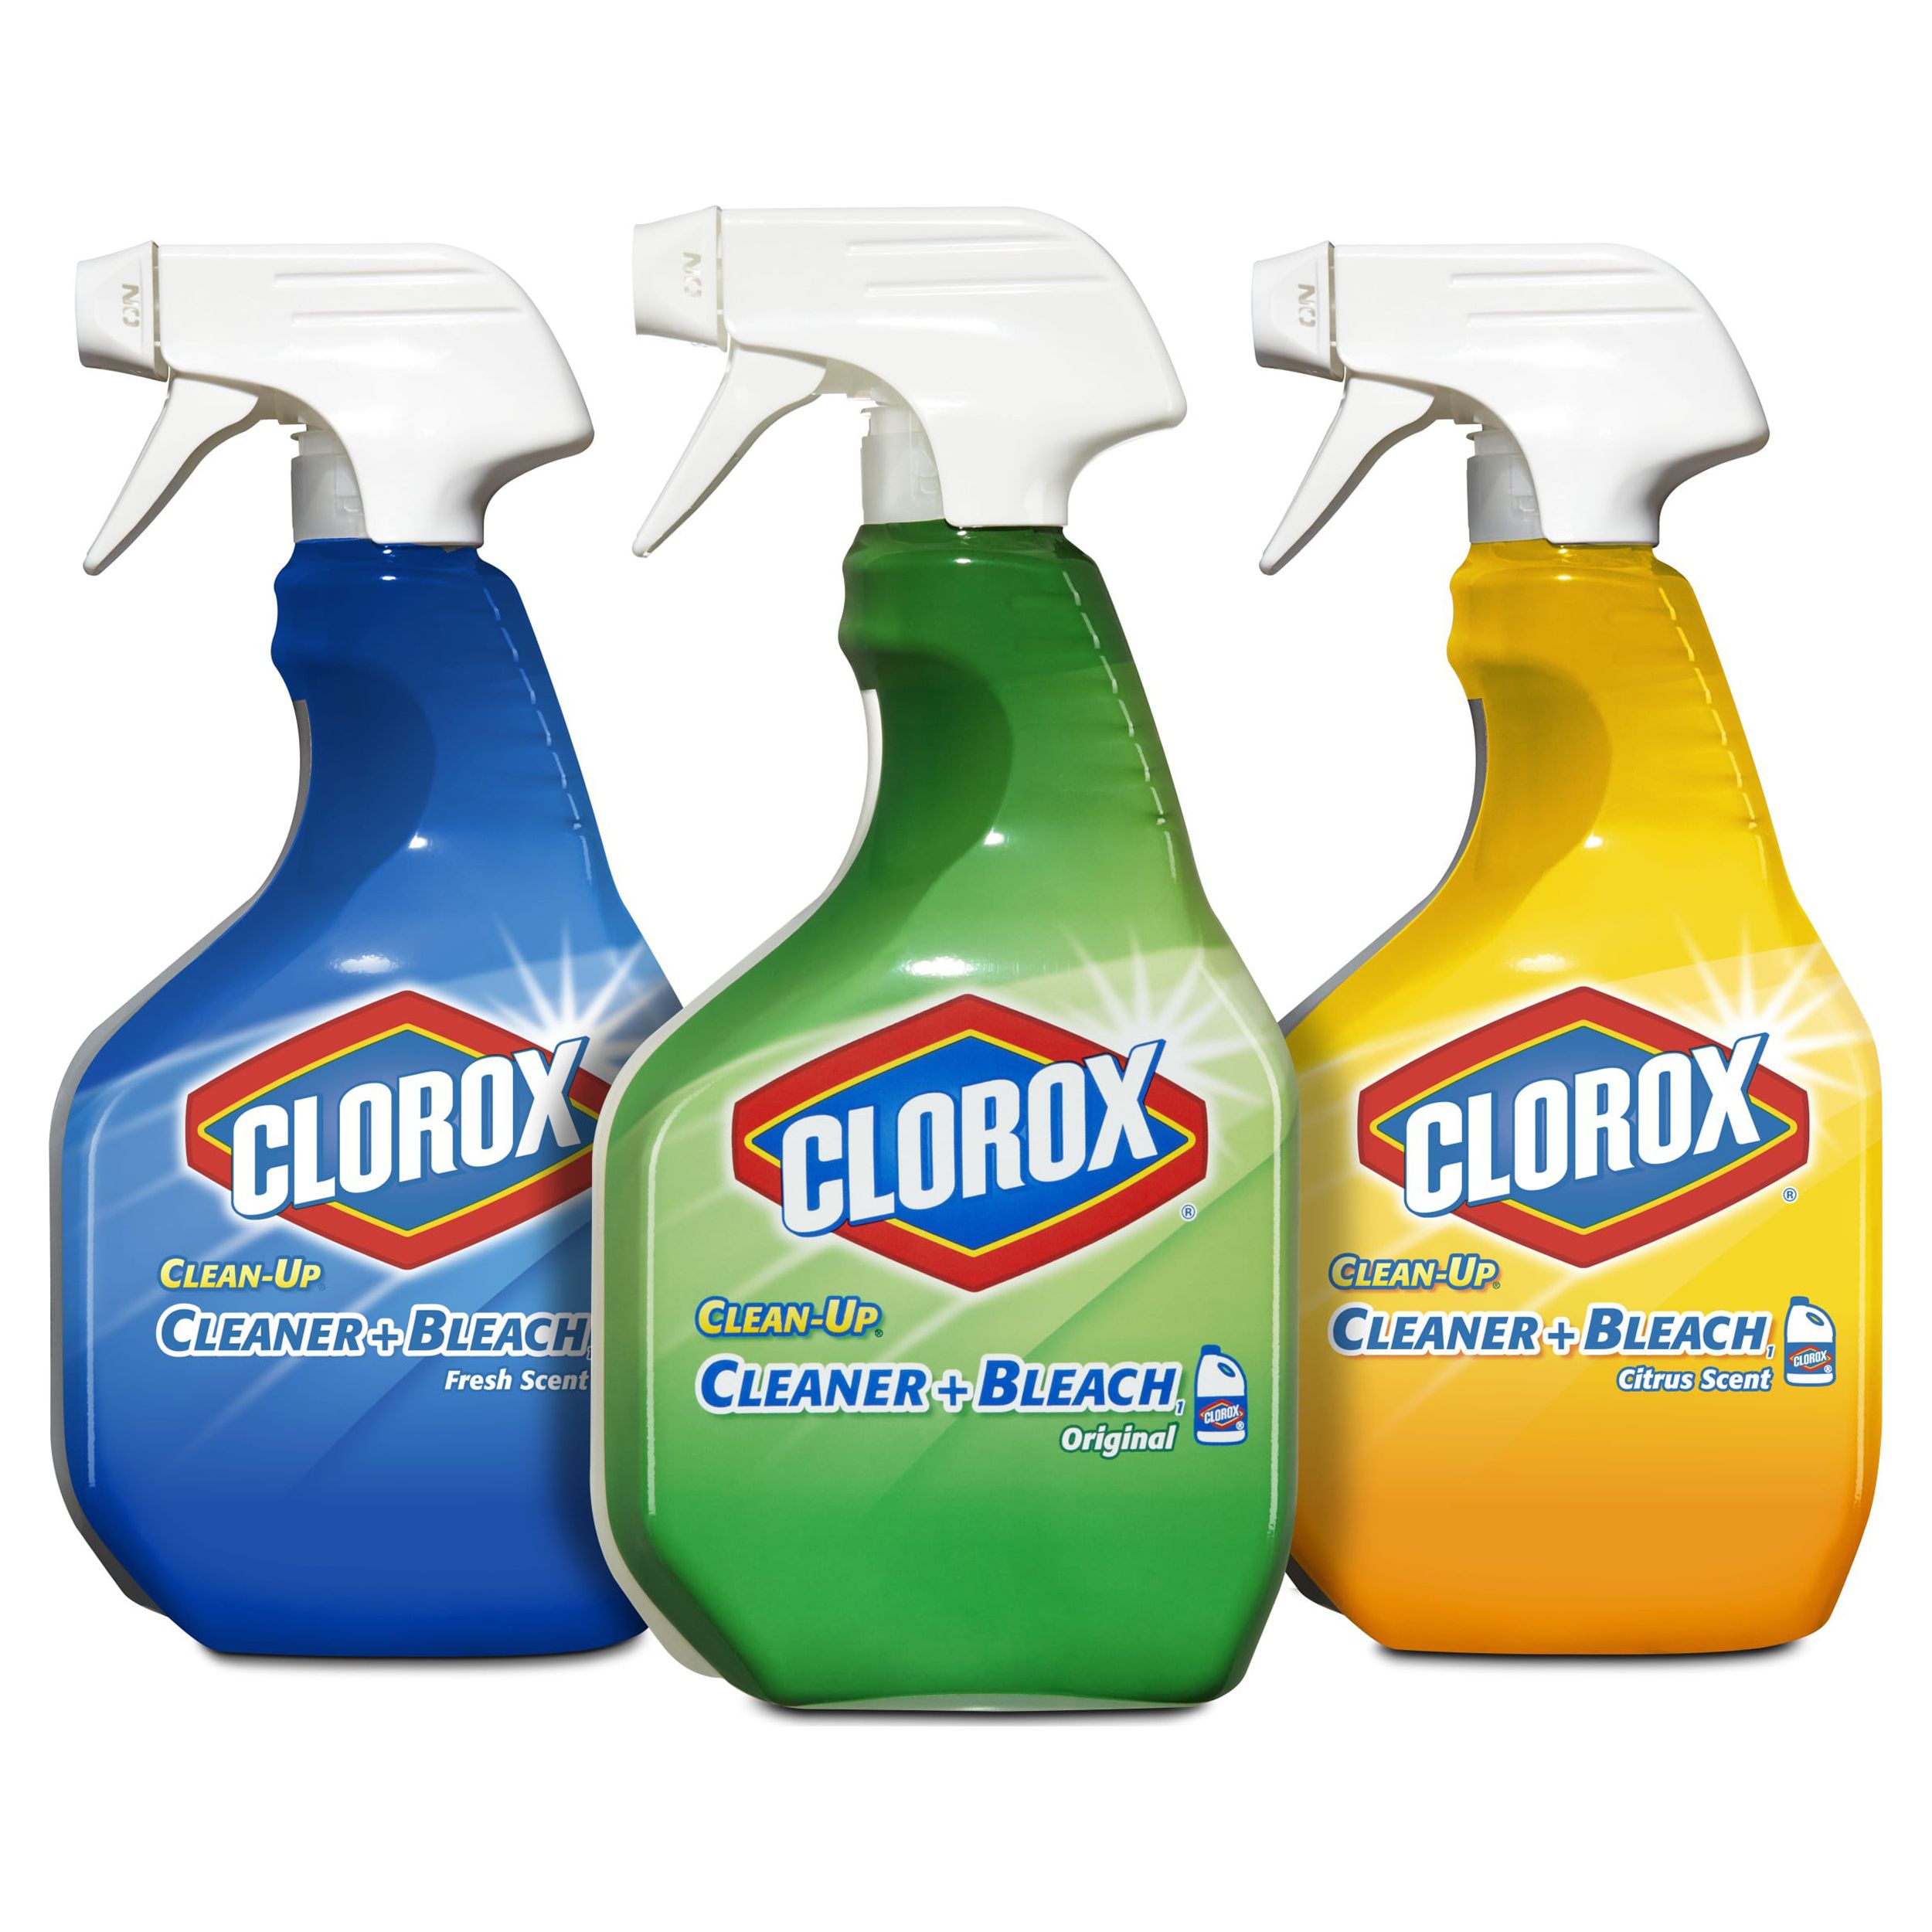 Clorox Clean-Up All Purpose Cleaner with Bleach, Spray Bottle, Lemon Scent, 32 oz - image 4 of 10